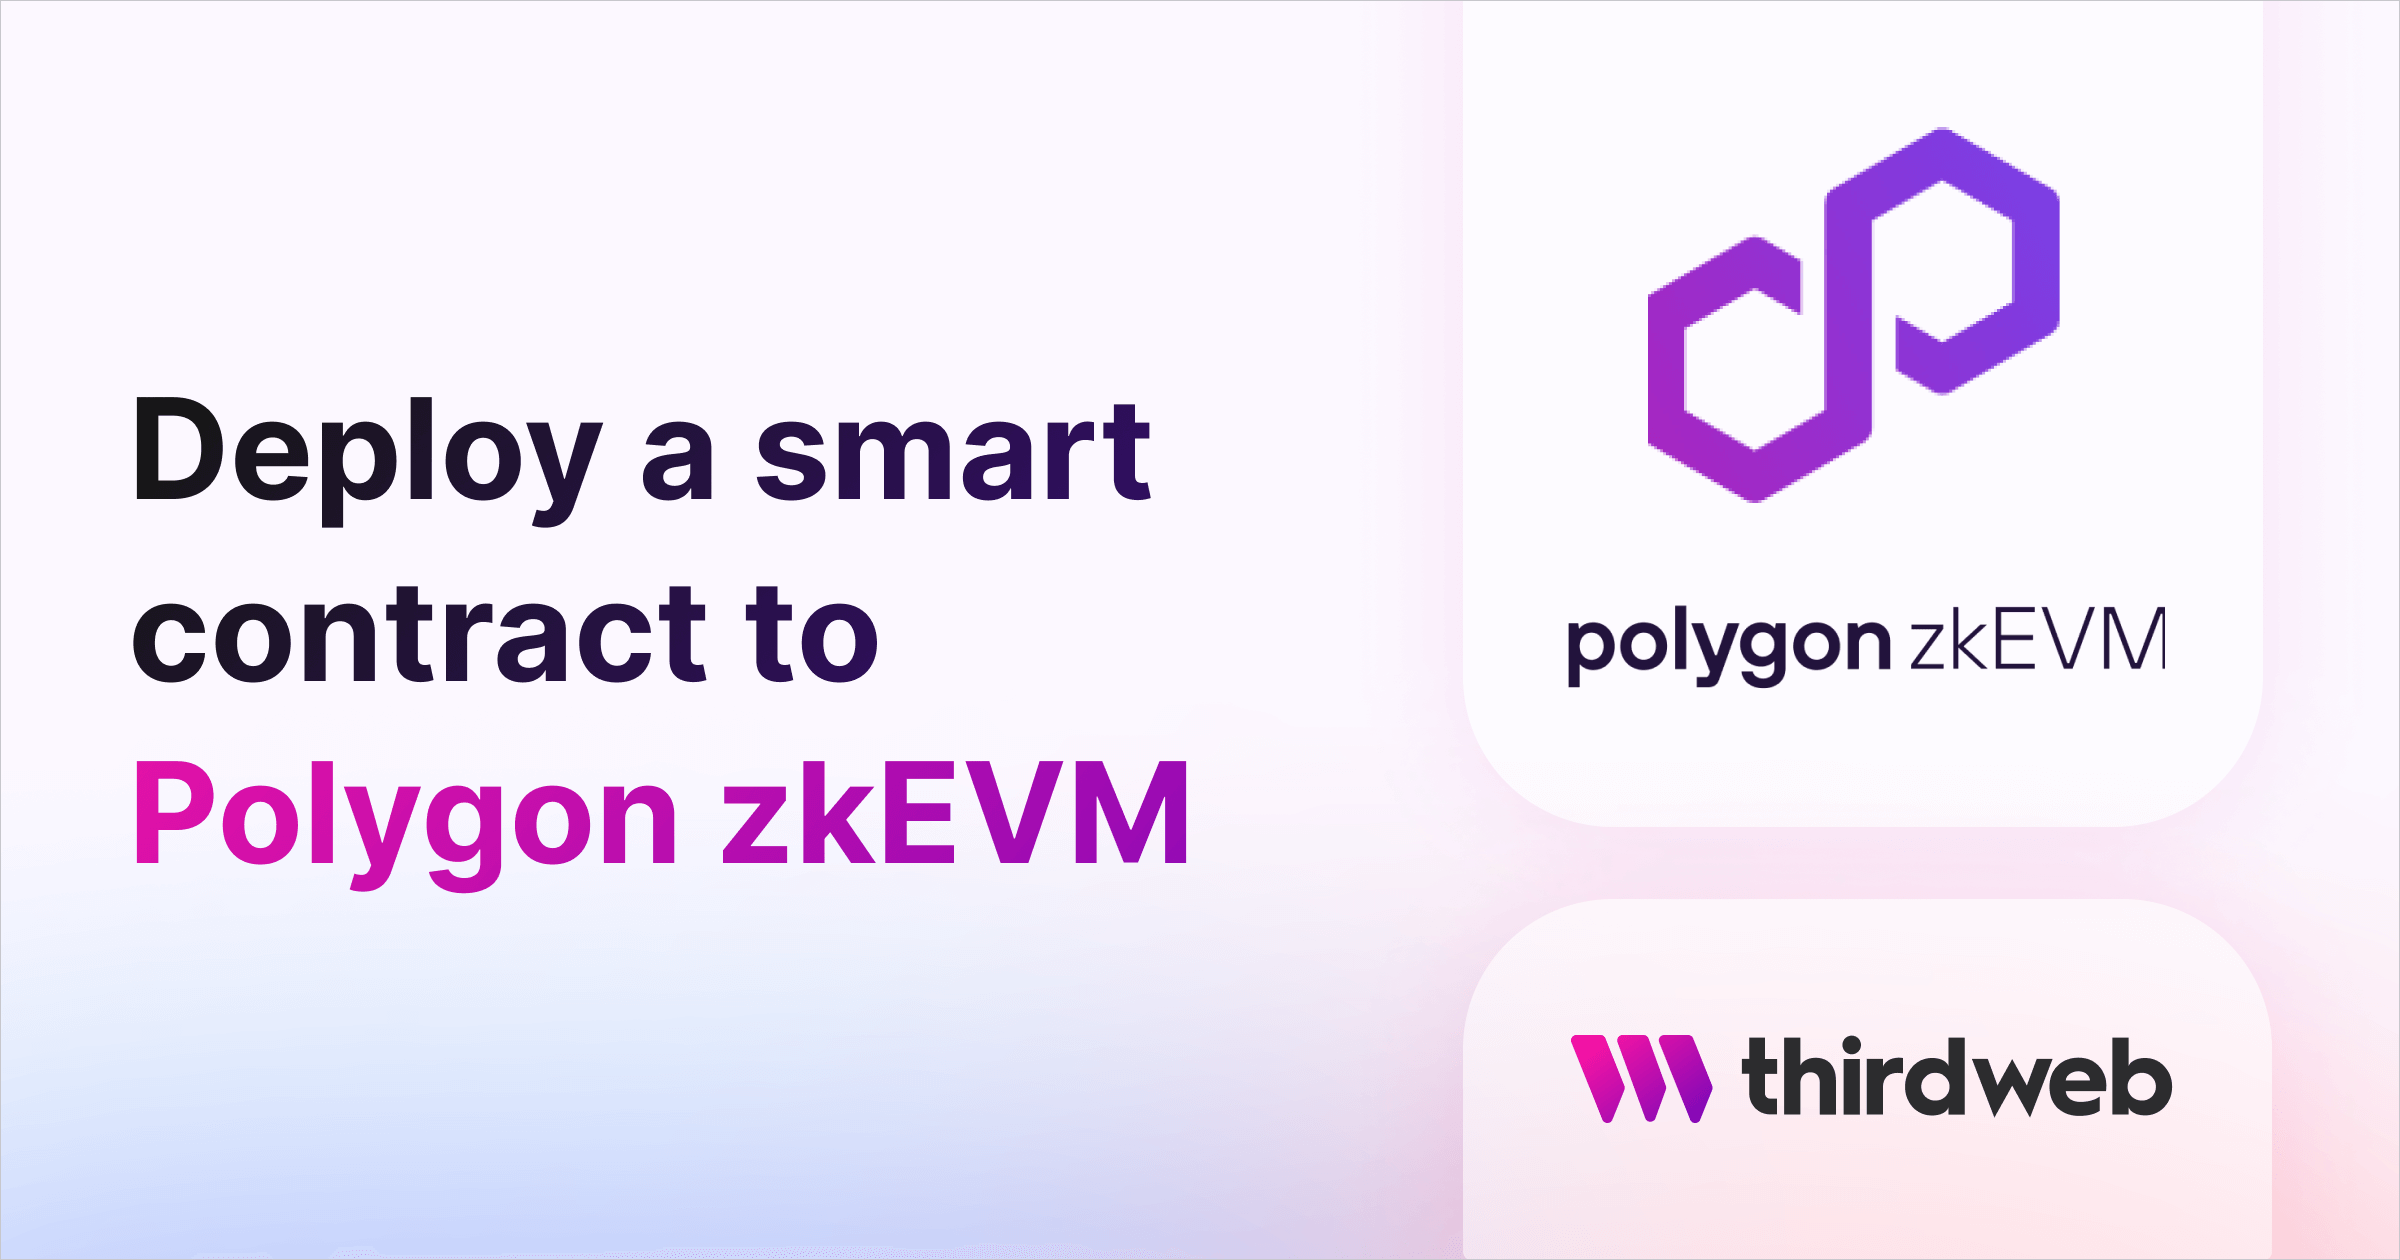 How to deploy a smart contract to the Polygon zkEVM network testnet - thirdweb Guides